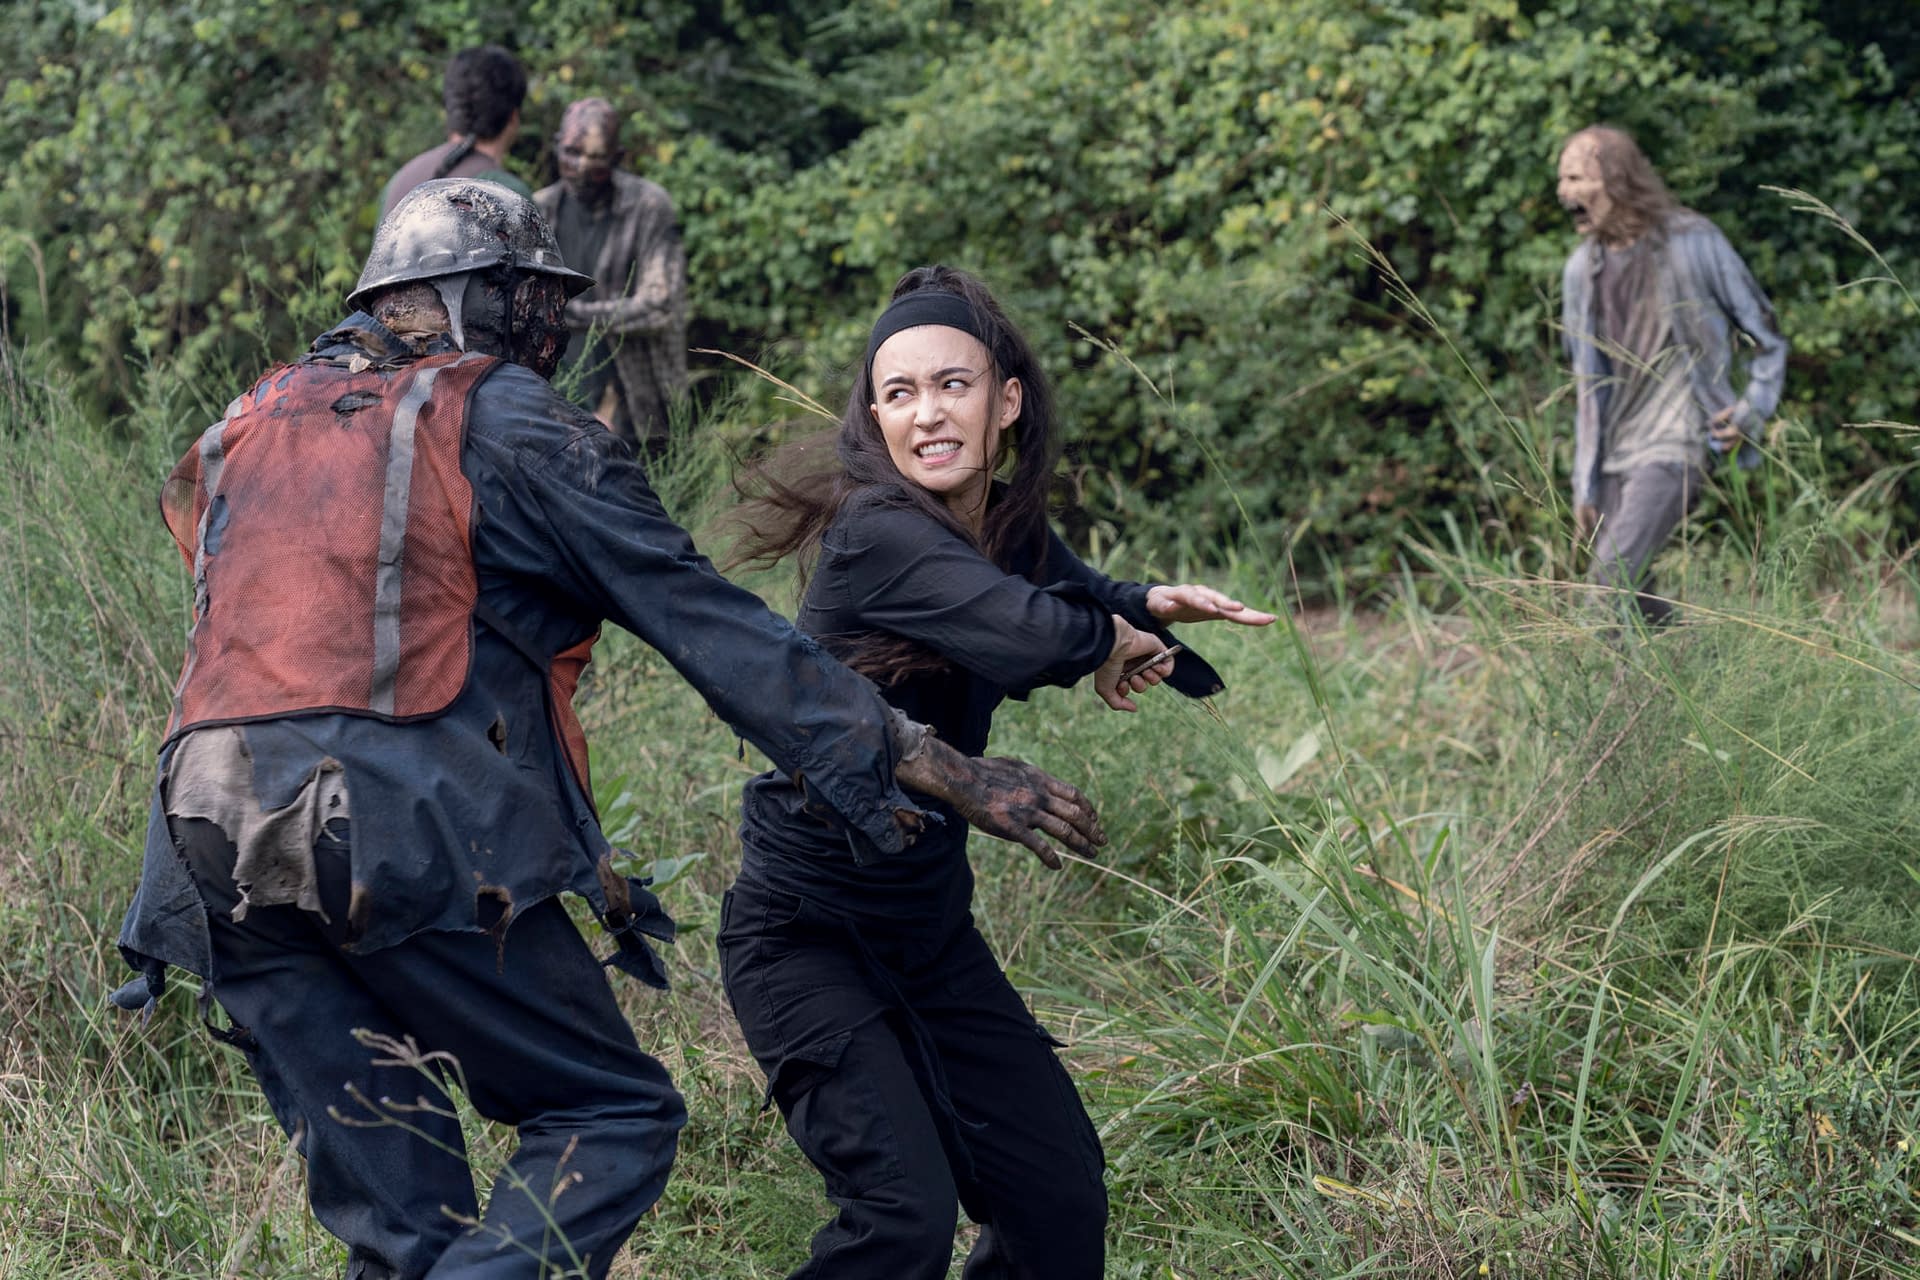 "The Walking Dead" Season 10 "The World Before": The Drumbeat of War Grows Louder [PREVIEW IMAGES]